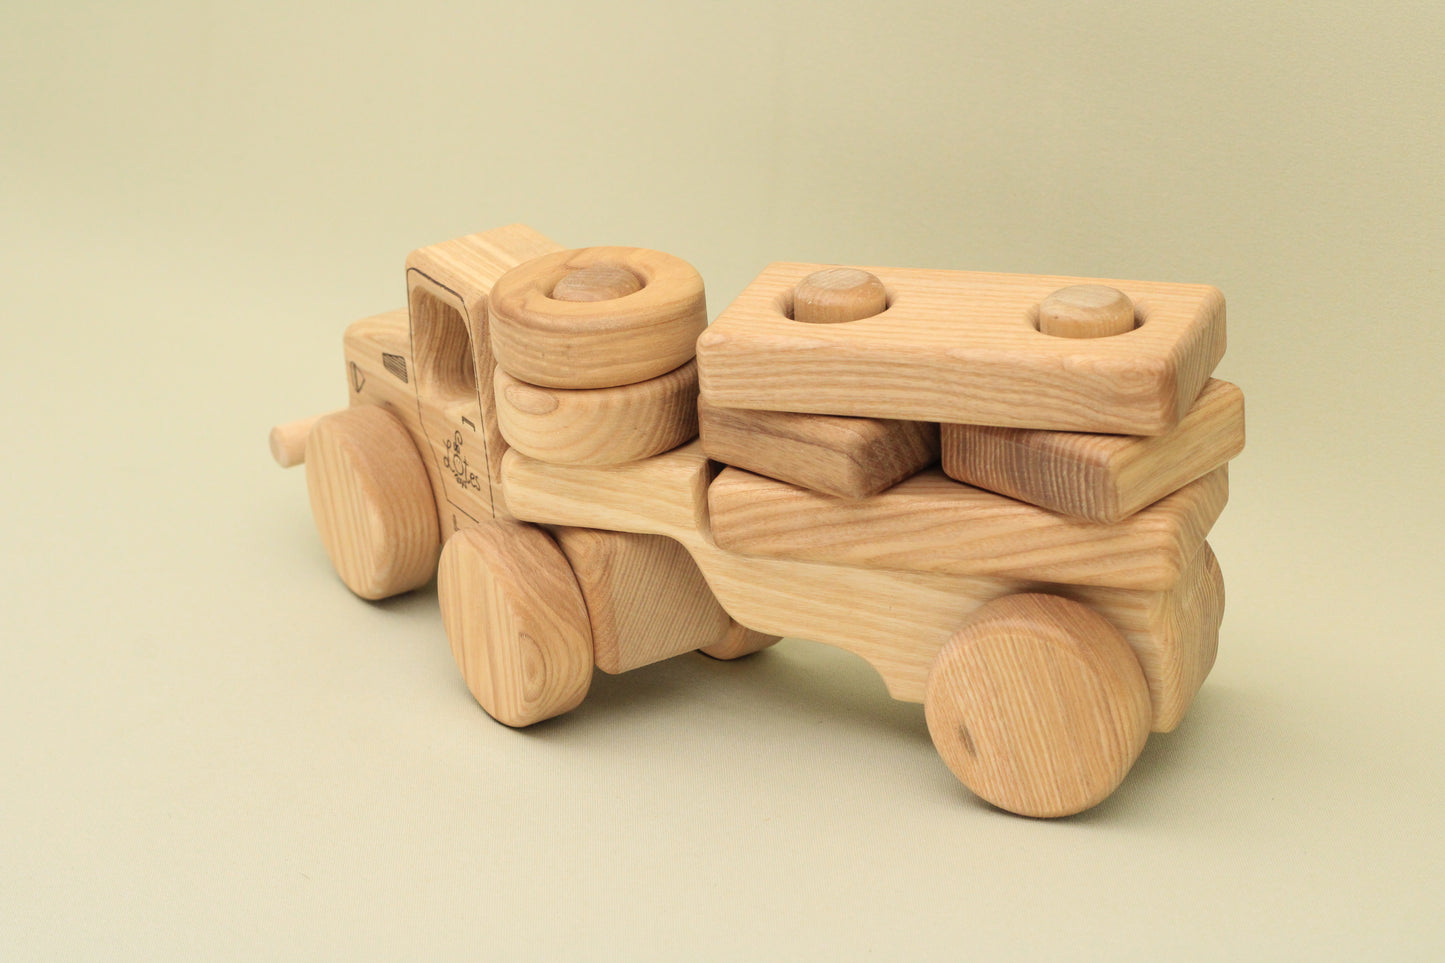 Lotes Toys Wooden Construction Vehicles Car BT52